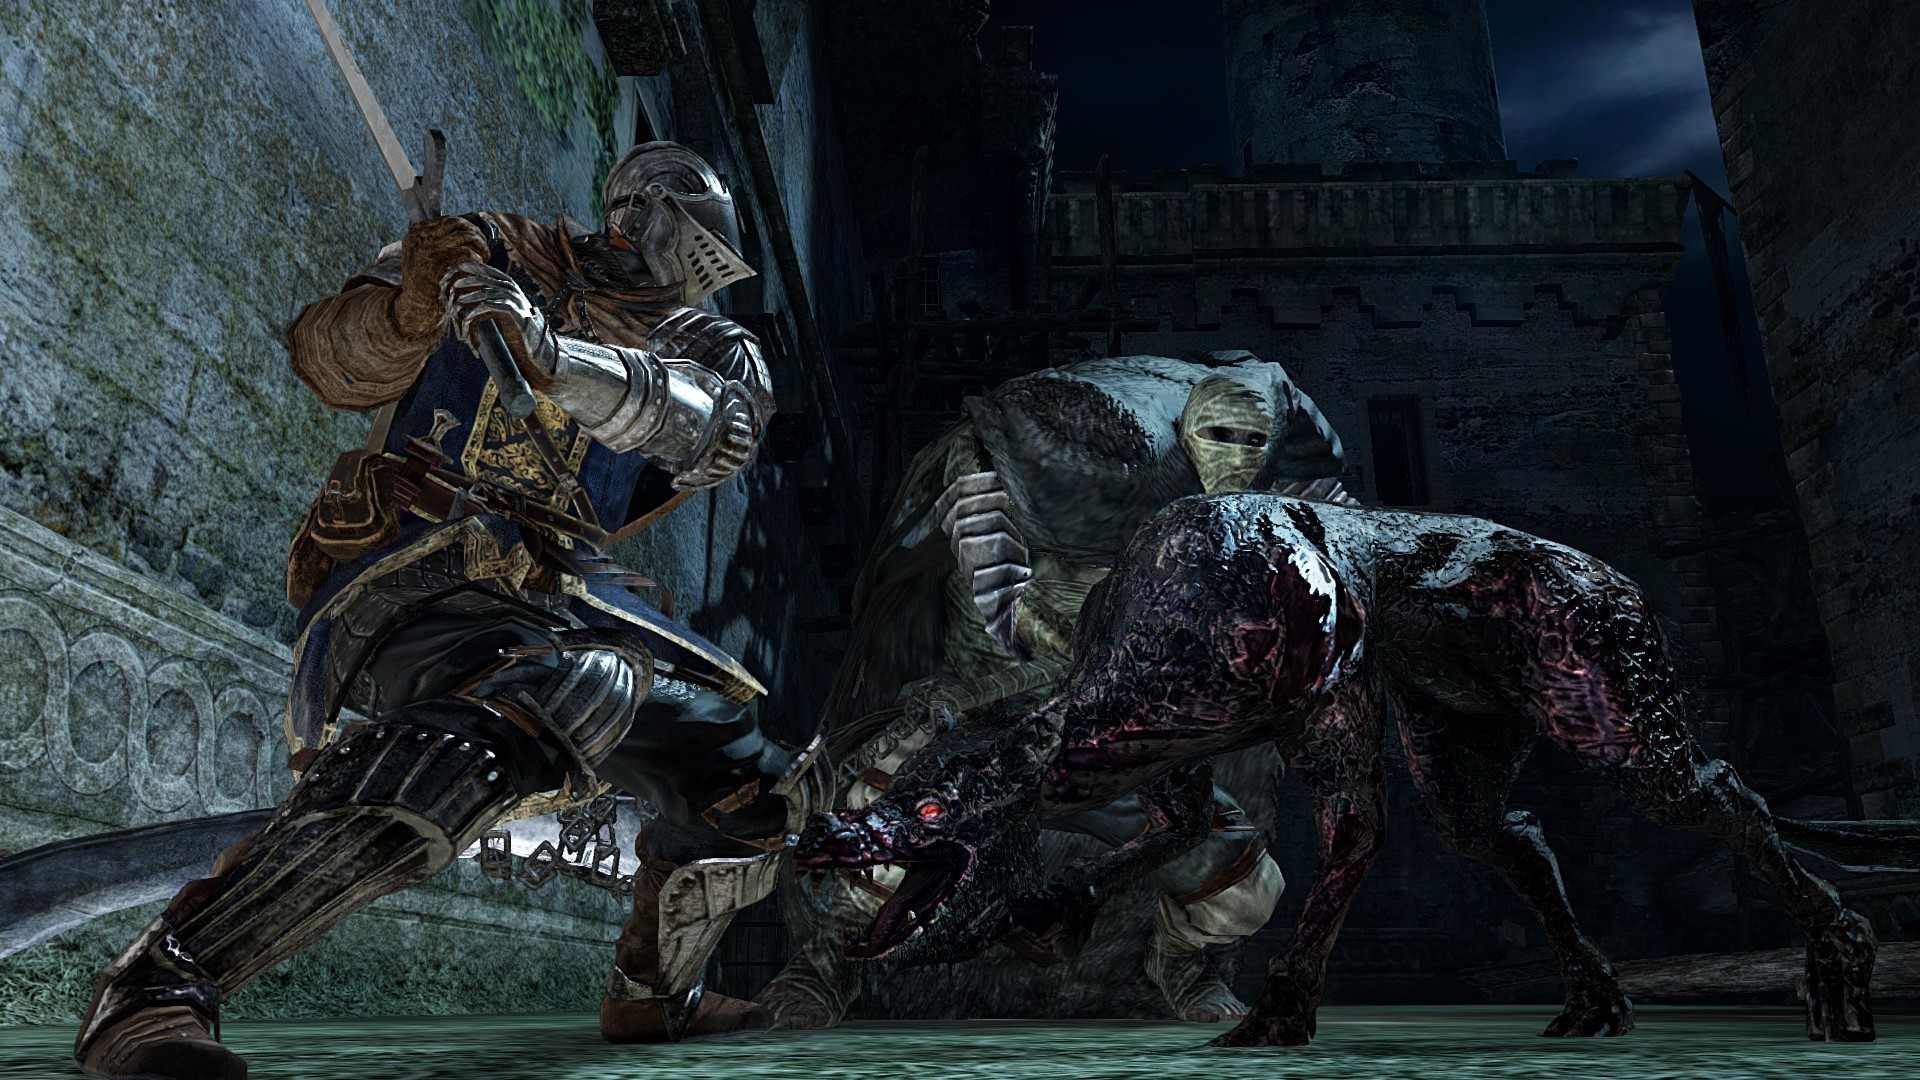 Dark Souls 2 On Pc Affected By Many Issues Bandai Namco Offers Temporary Solutions